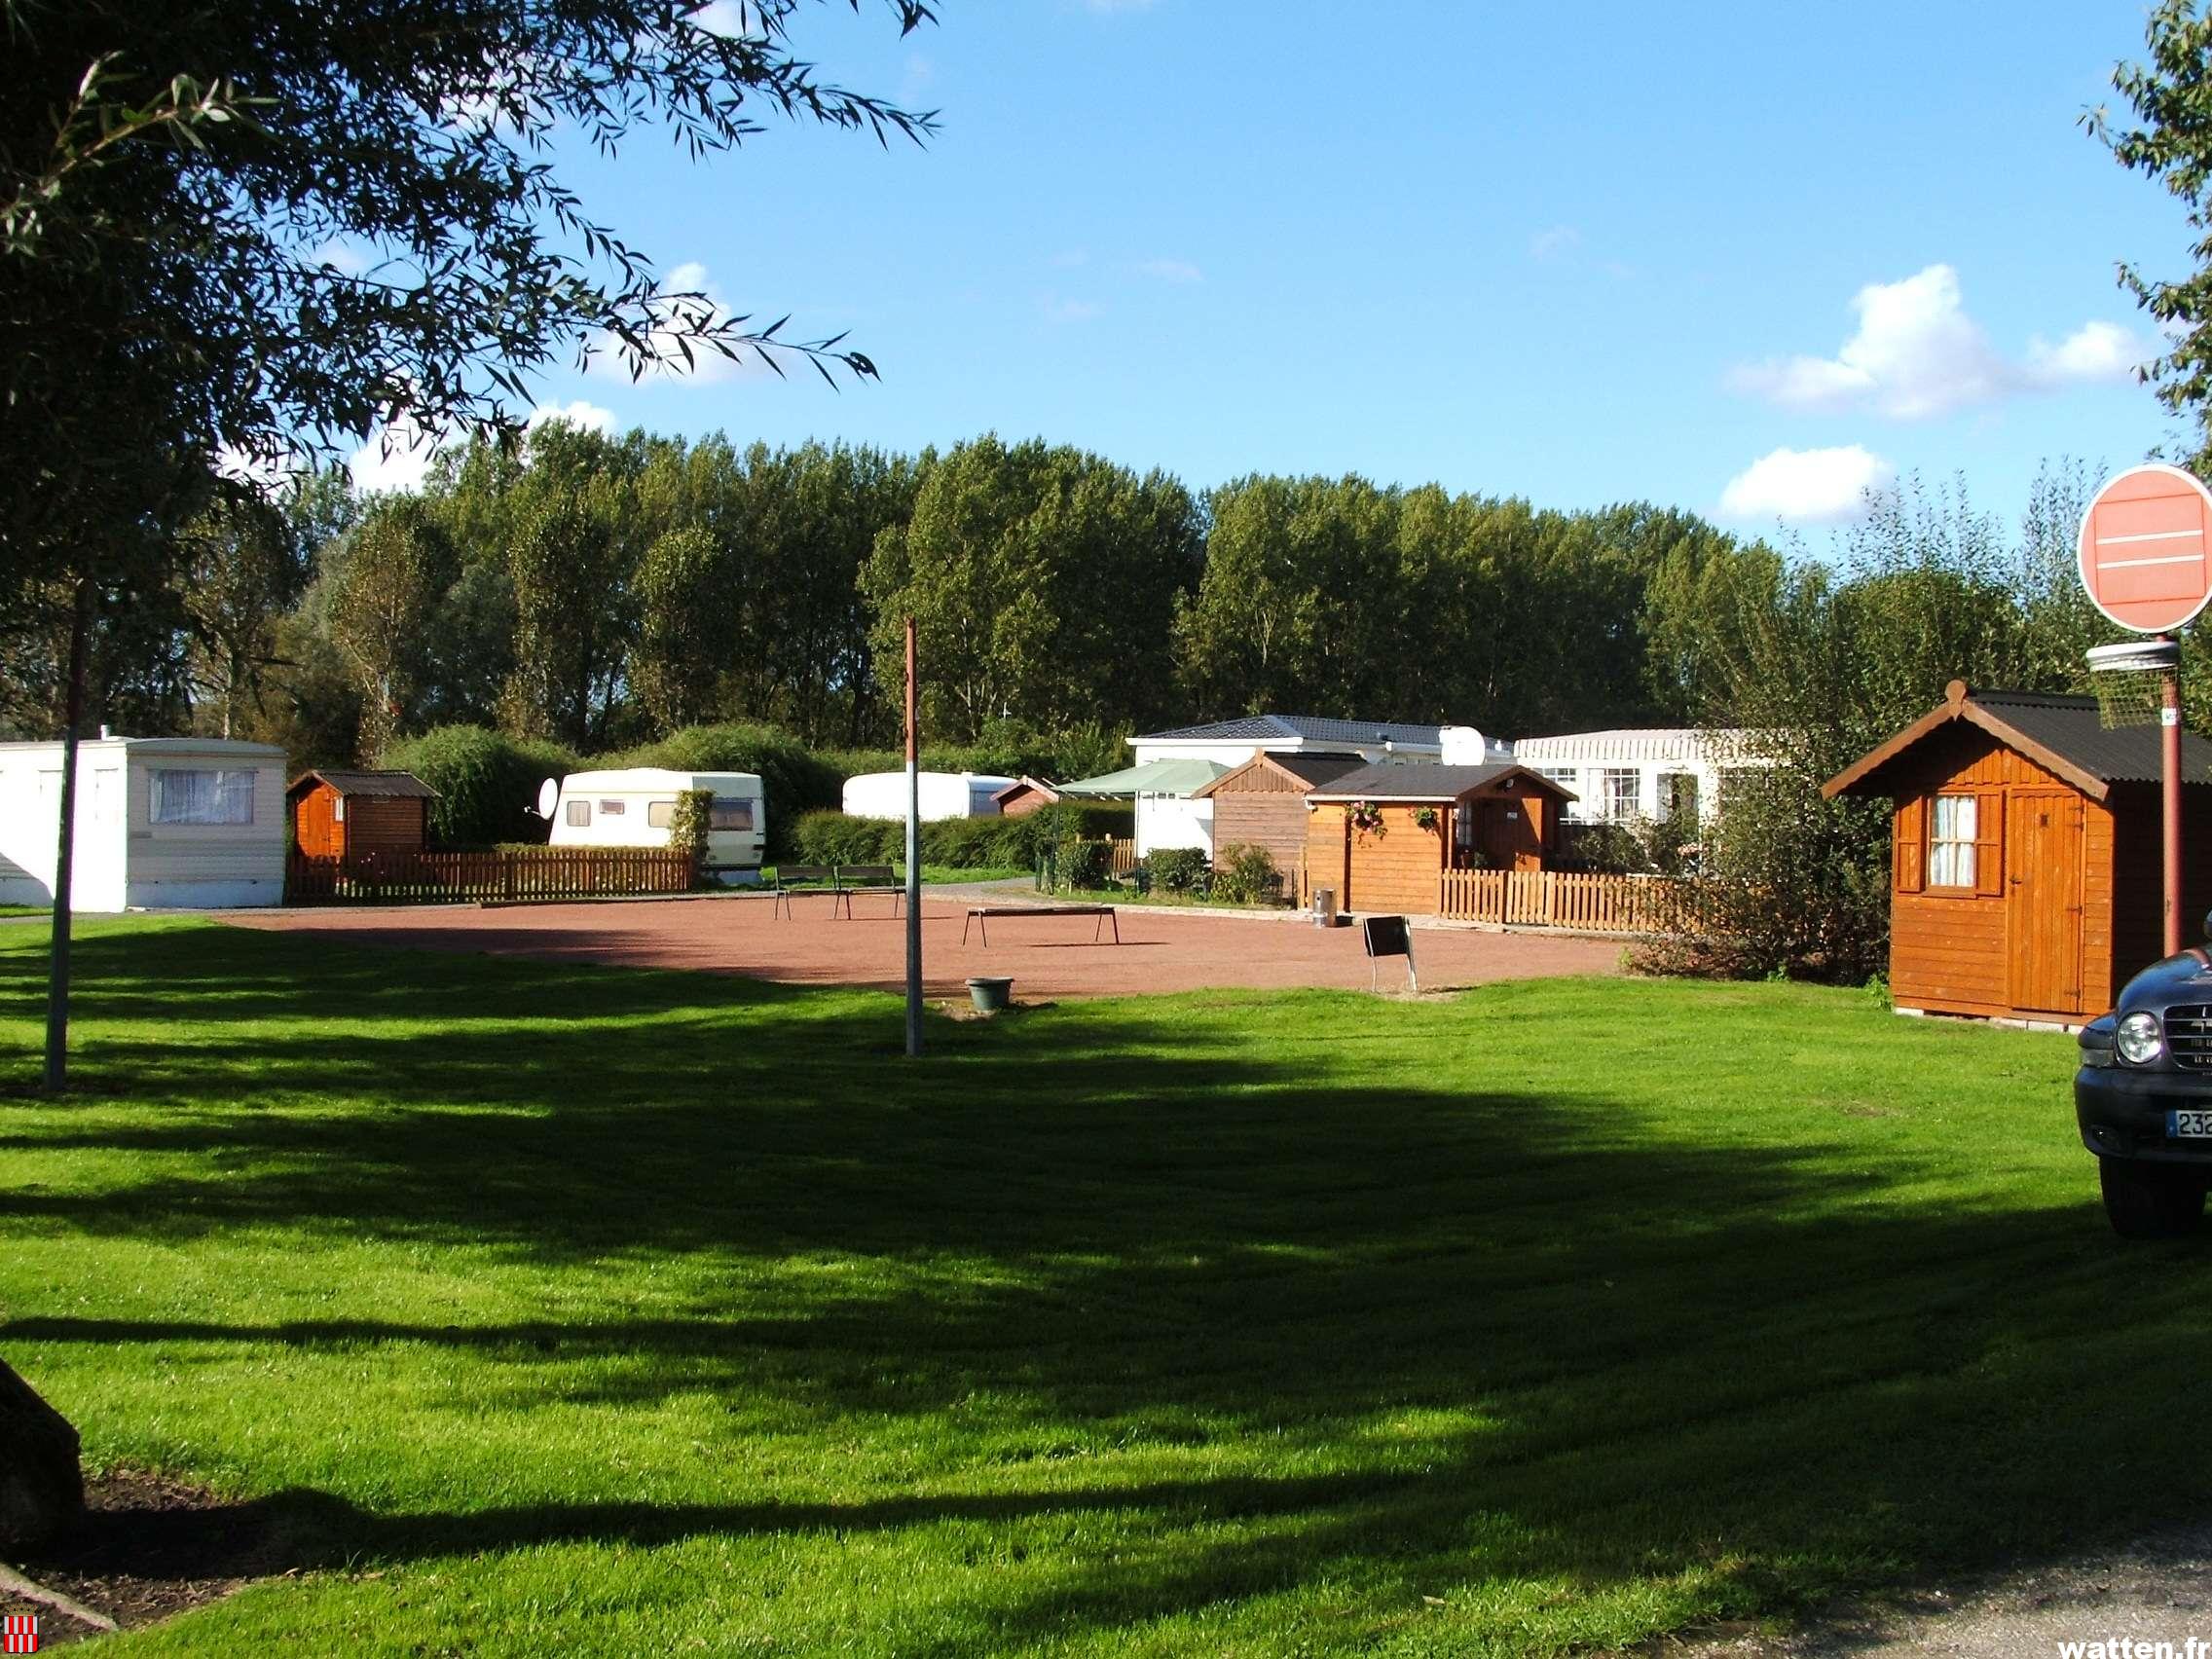 Camping Le Val Joly**